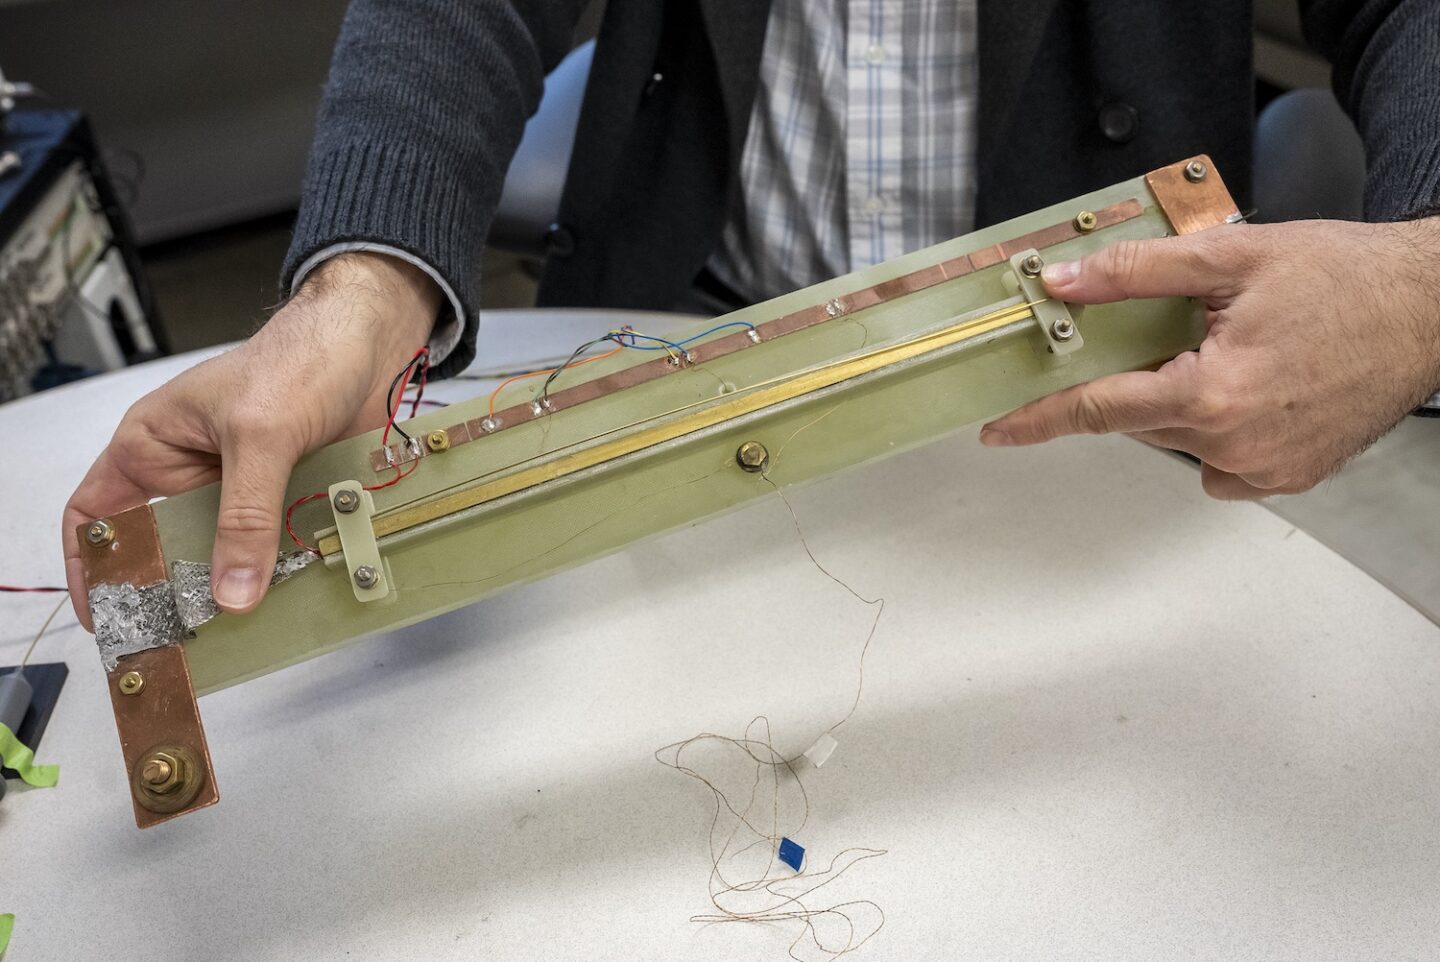 A long thin board approximately 3 by 14 inches with a strip of superconducting material and a heating wire above it.